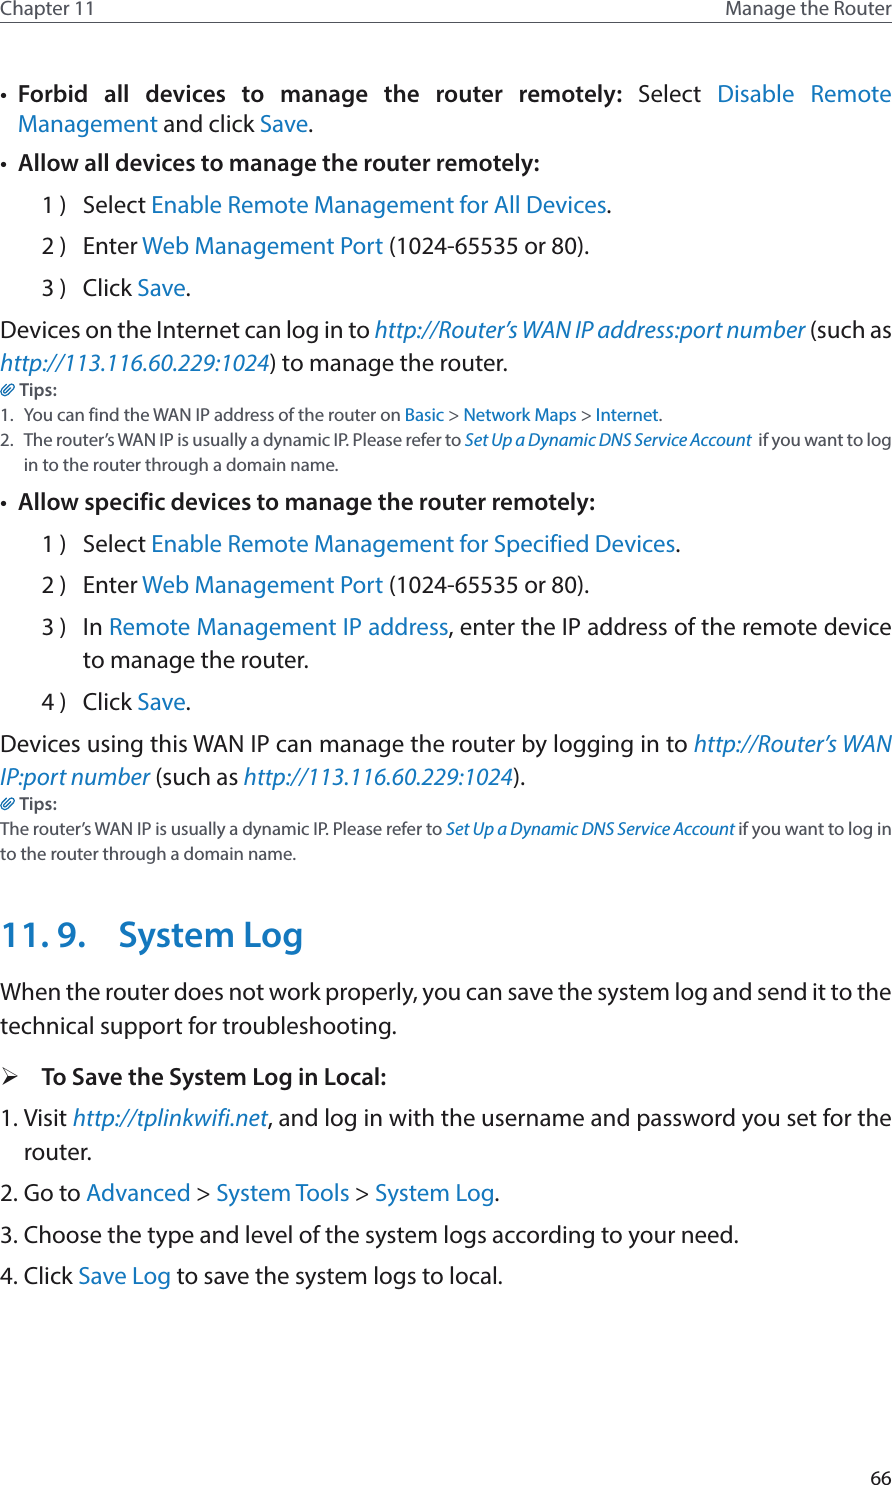 66Chapter 11 Manage the Router •  Forbid all devices to manage the router remotely:  Select  Disable Remote Management and click Save.•  Allow all devices to manage the router remotely:1 )  Select Enable Remote Management for All Devices.2 )  Enter Web Management Port (1024-65535 or 80).3 )  Click Save.Devices on the Internet can log in to http://Router’s WAN IP address:port number (such as http://113.116.60.229:1024) to manage the router.Tips:1.  You can find the WAN IP address of the router on Basic &gt; Network Maps &gt; Internet.2.  The router’s WAN IP is usually a dynamic IP. Please refer to Set Up a Dynamic DNS Service Account  if you want to log in to the router through a domain name.•  Allow specific devices to manage the router remotely:1 )  Select Enable Remote Management for Specified Devices.2 )  Enter Web Management Port (1024-65535 or 80).3 )  In Remote Management IP address, enter the IP address of the remote device to manage the router.4 )  Click Save.Devices using this WAN IP can manage the router by logging in to http://Router’s WAN IP:port number (such as http://113.116.60.229:1024).Tips: The router’s WAN IP is usually a dynamic IP. Please refer to Set Up a Dynamic DNS Service Account if you want to log in to the router through a domain name.11. 9.  System LogWhen the router does not work properly, you can save the system log and send it to the technical support for troubleshooting. ¾To Save the System Log in Local:1. Visit http://tplinkwifi.net, and log in with the username and password you set for the router.2. Go to Advanced &gt; System Tools &gt; System Log.3. Choose the type and level of the system logs according to your need.4. Click Save Log to save the system logs to local.